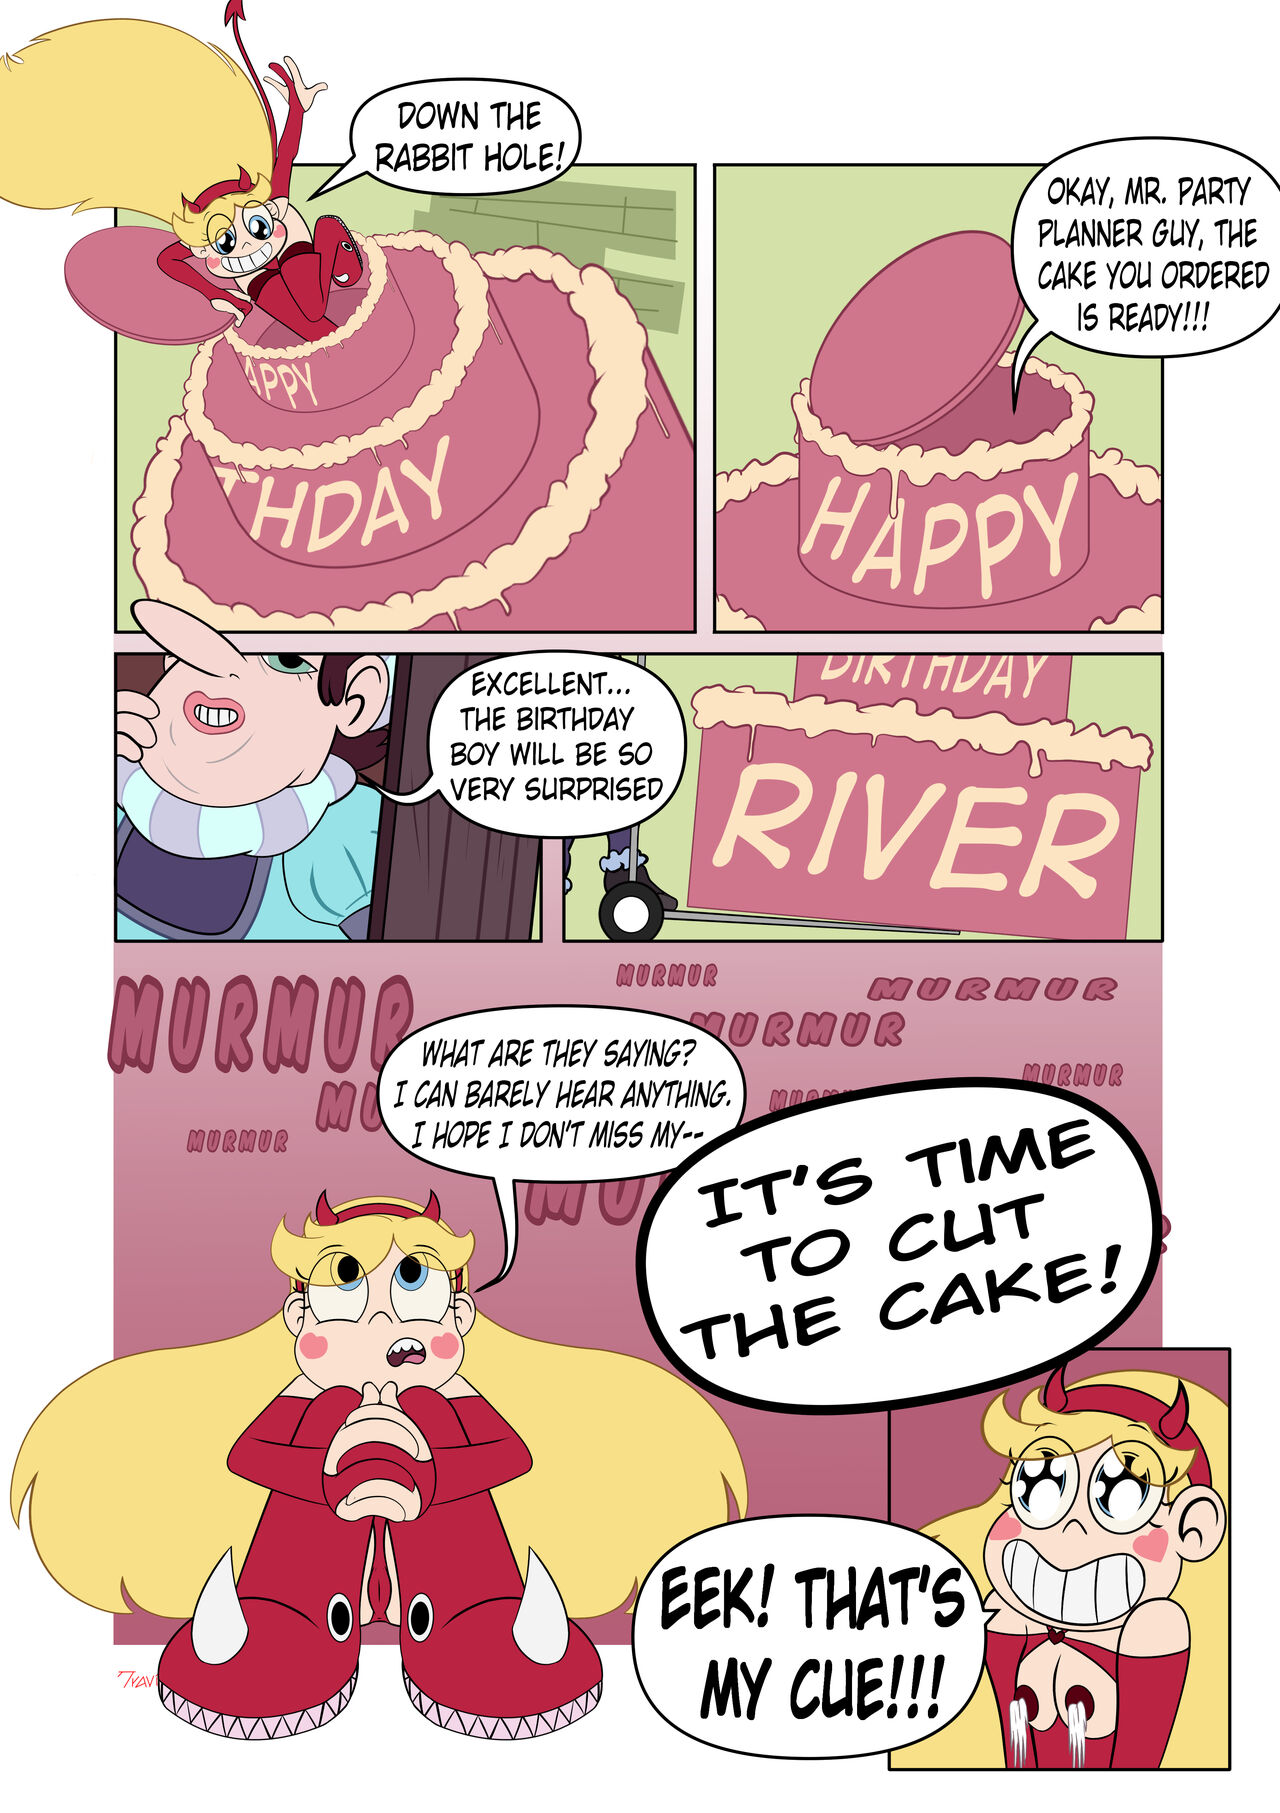 A Star is Born – Star vs. the Forces of Evil by Travis-T